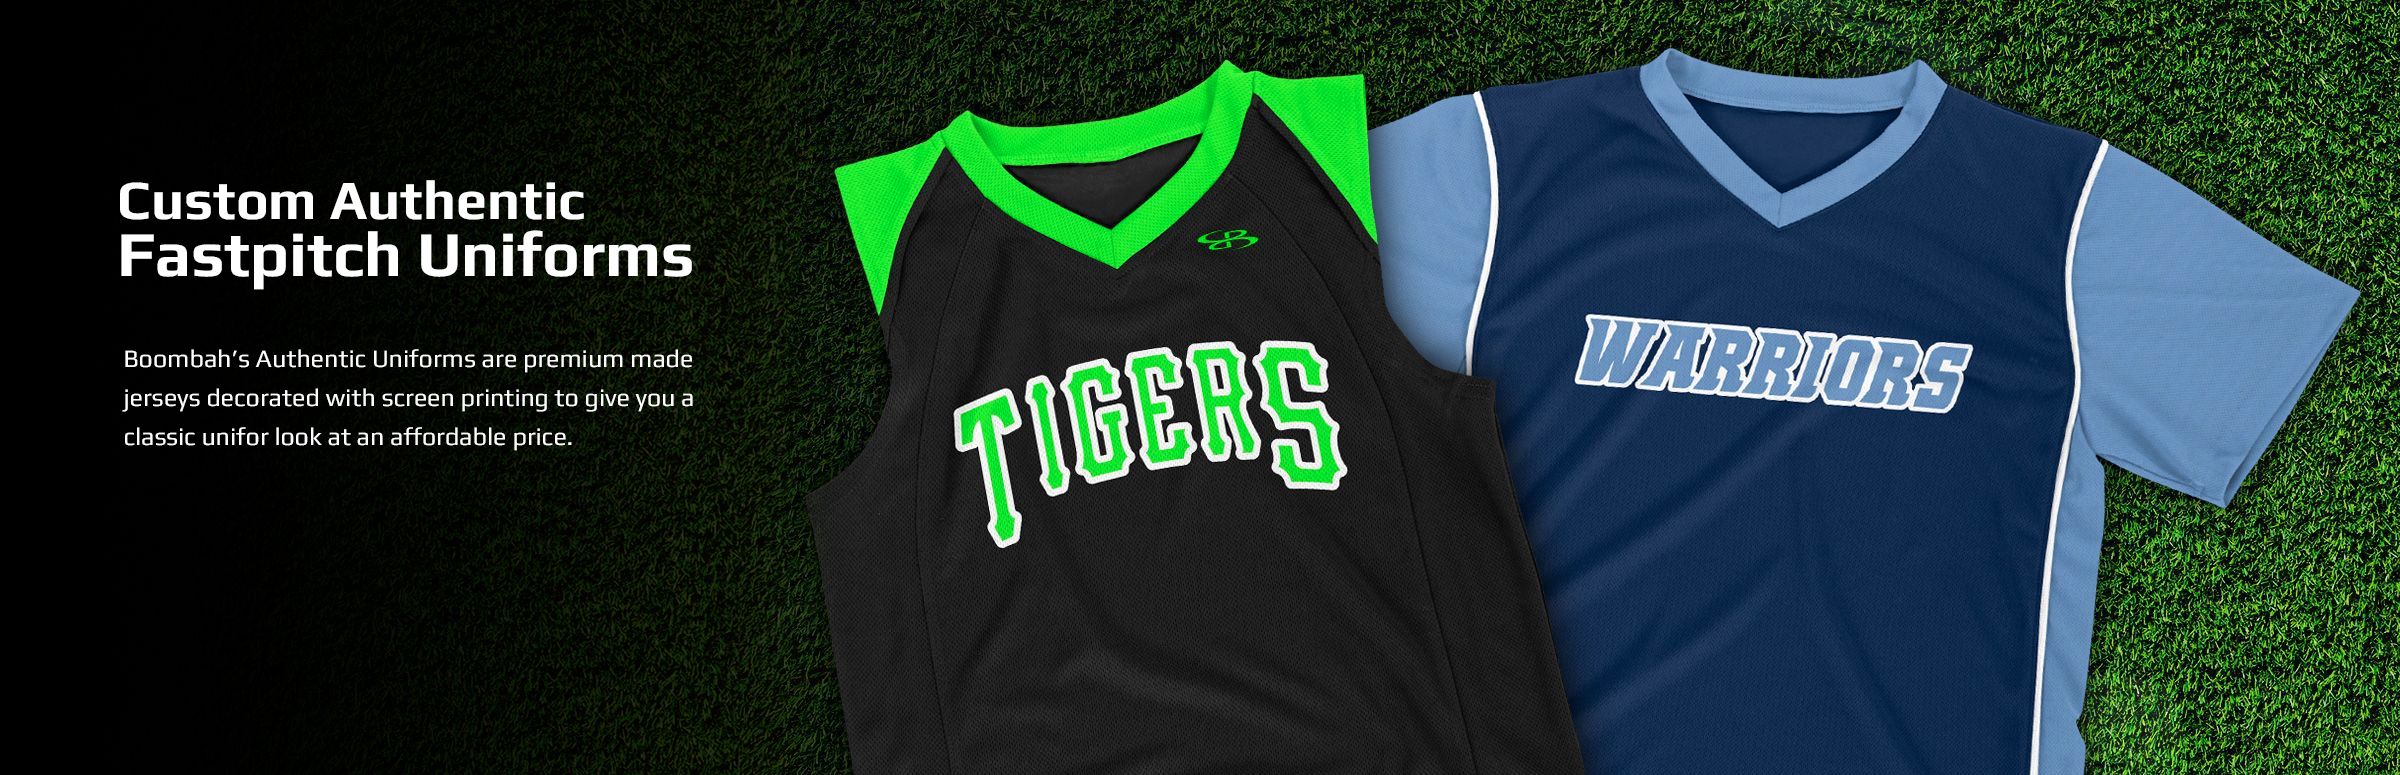 Boombah Fastpitch Uniforms